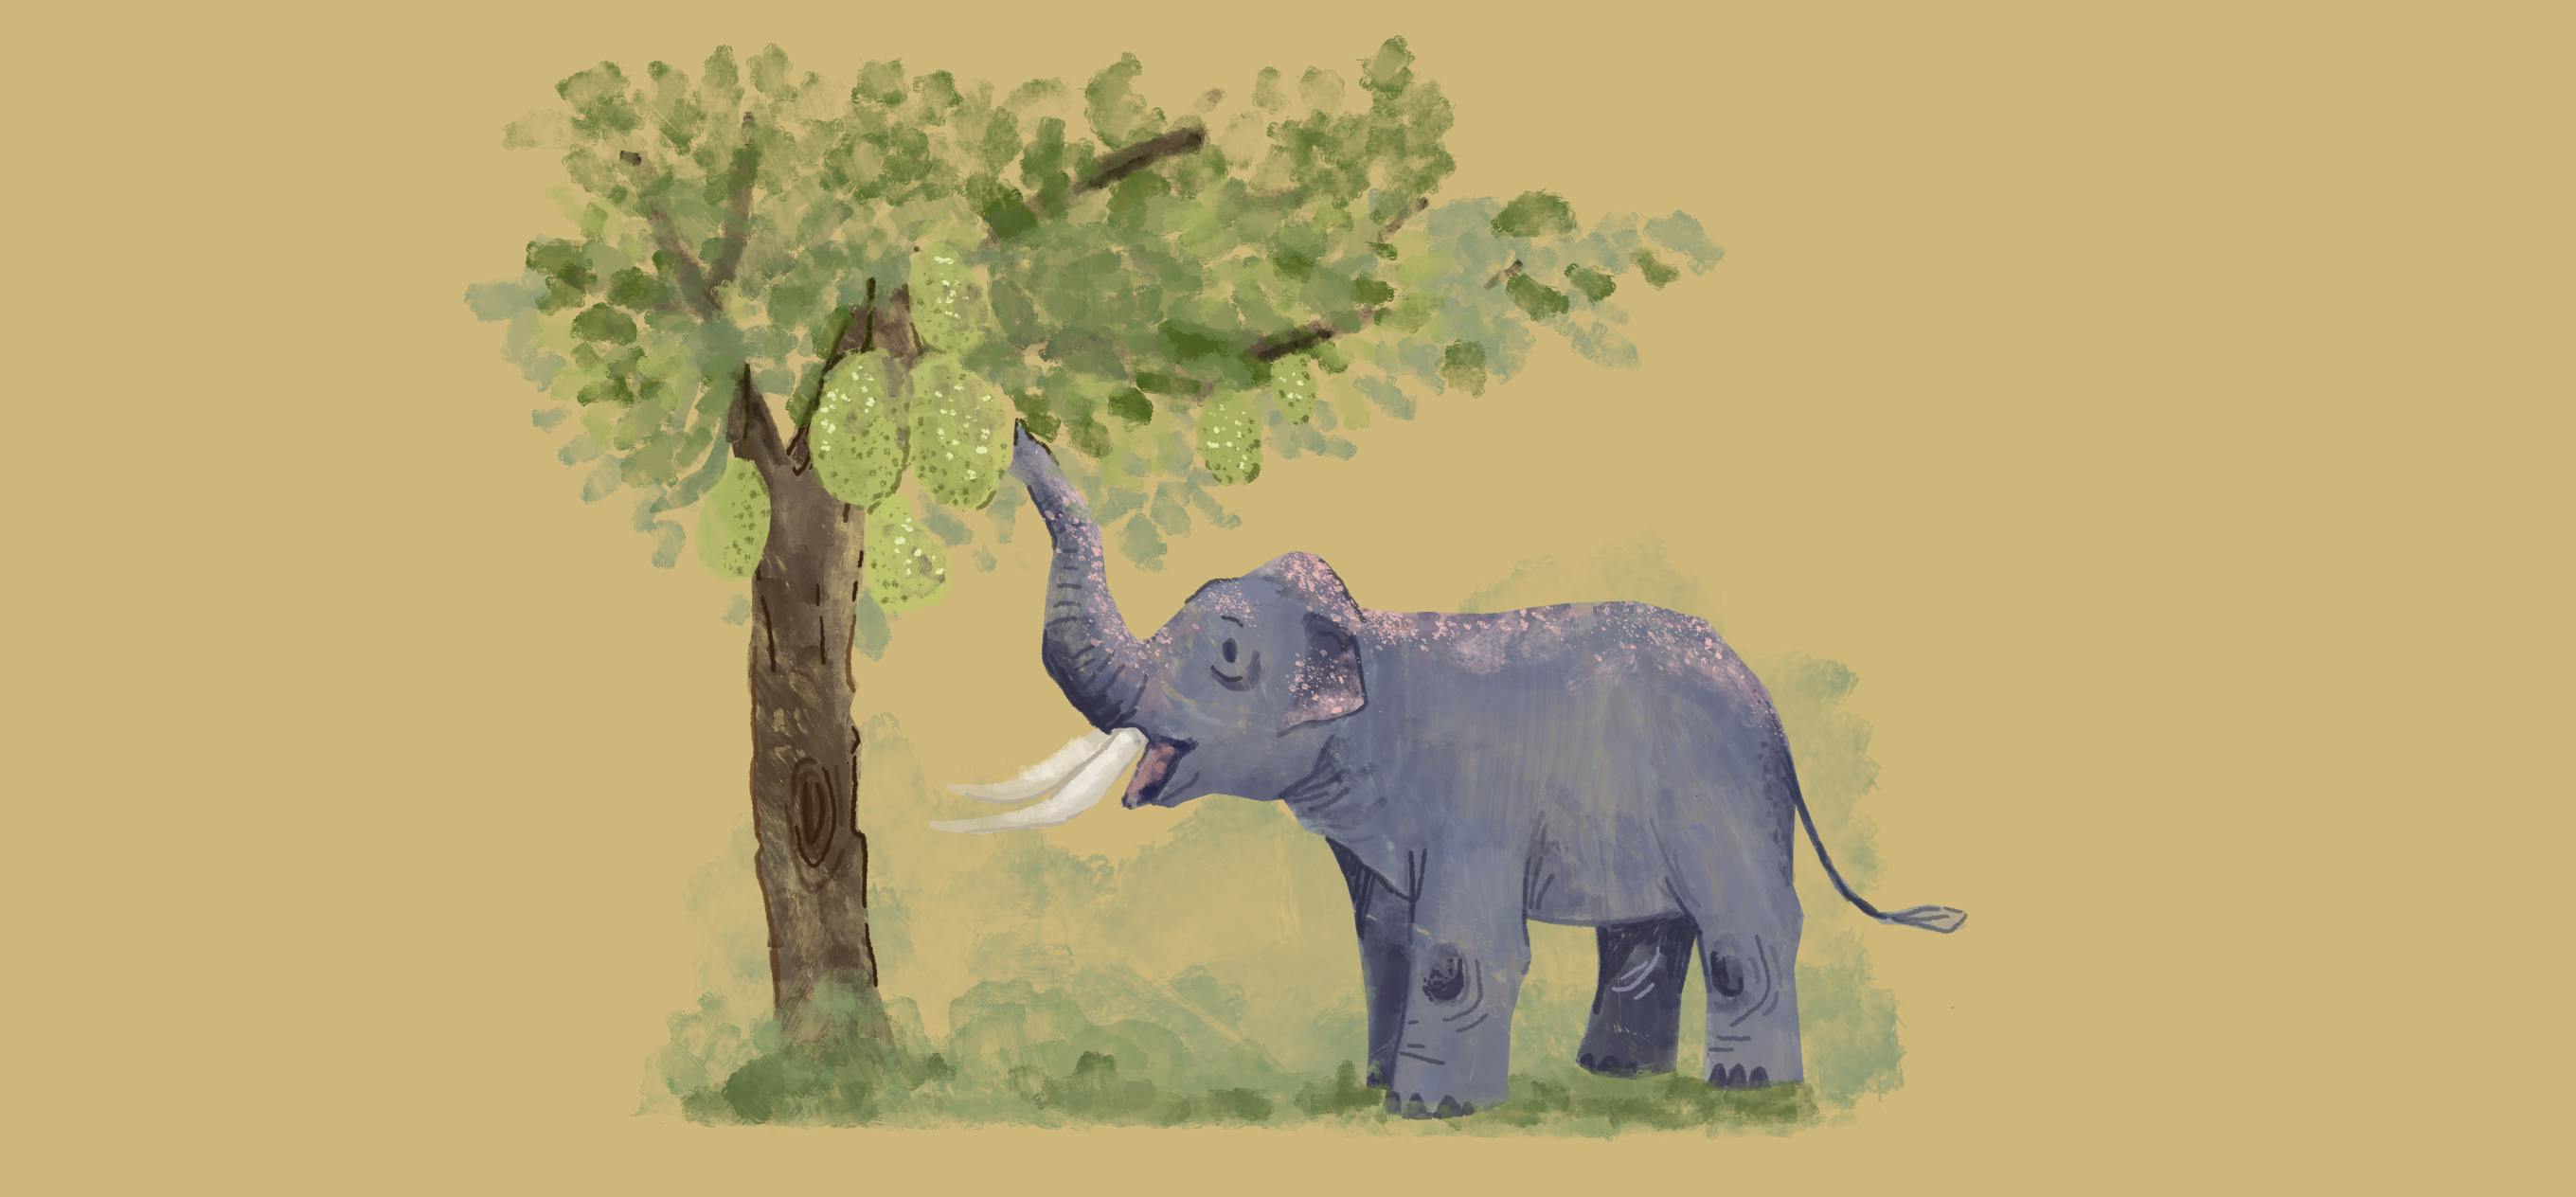 Elephants in the Room by Abhilash Pavuluri; Illustration by Akshaya Zachariah for FiftyTwo.in